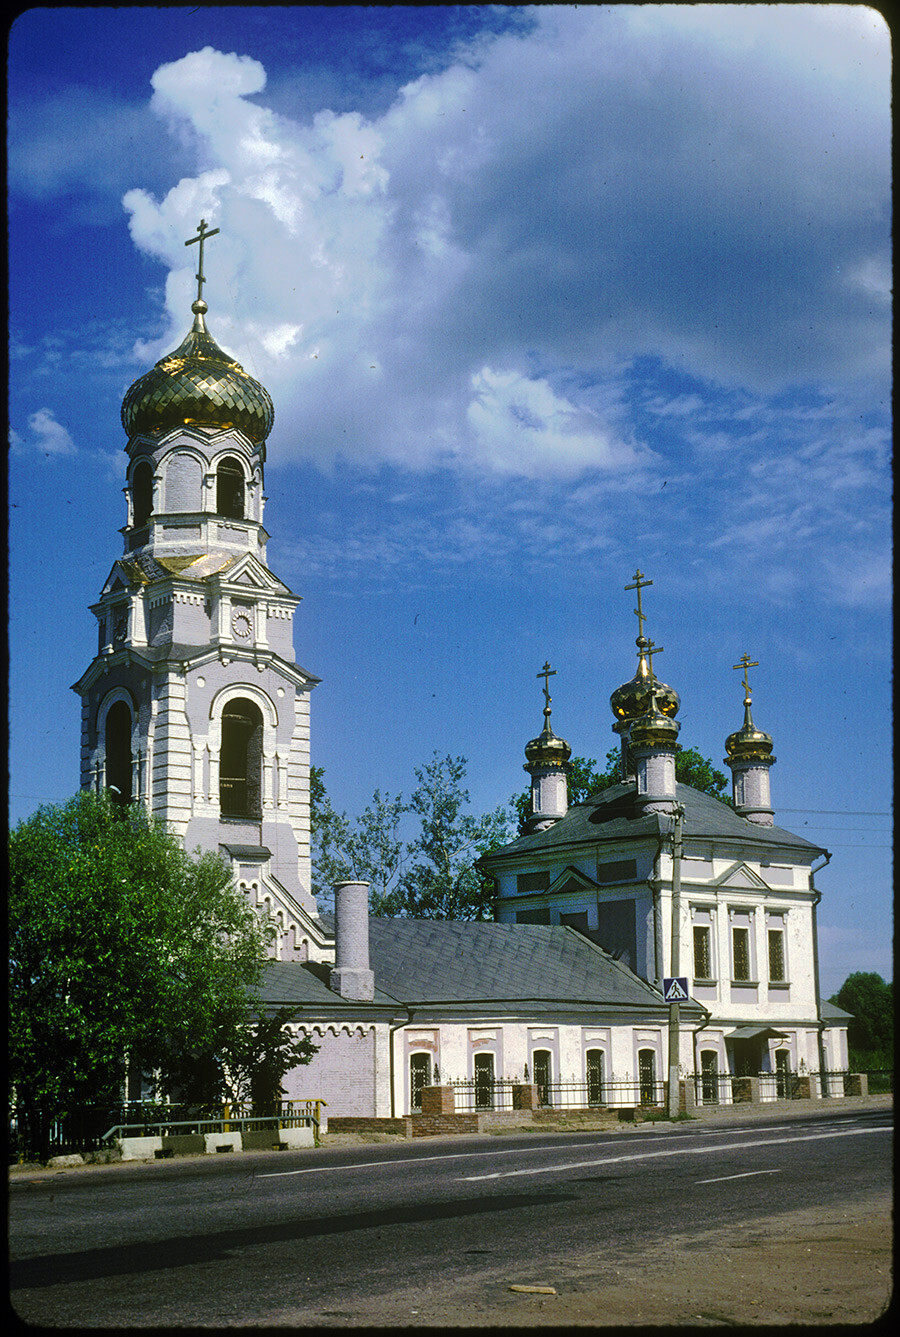 Church of the Purification, southwest view. Built 1814 in provincial Neoclassical style as monument to the 1812 victory; bell tower added 1883-4 by Sergey Rodionov. July 20, 1997